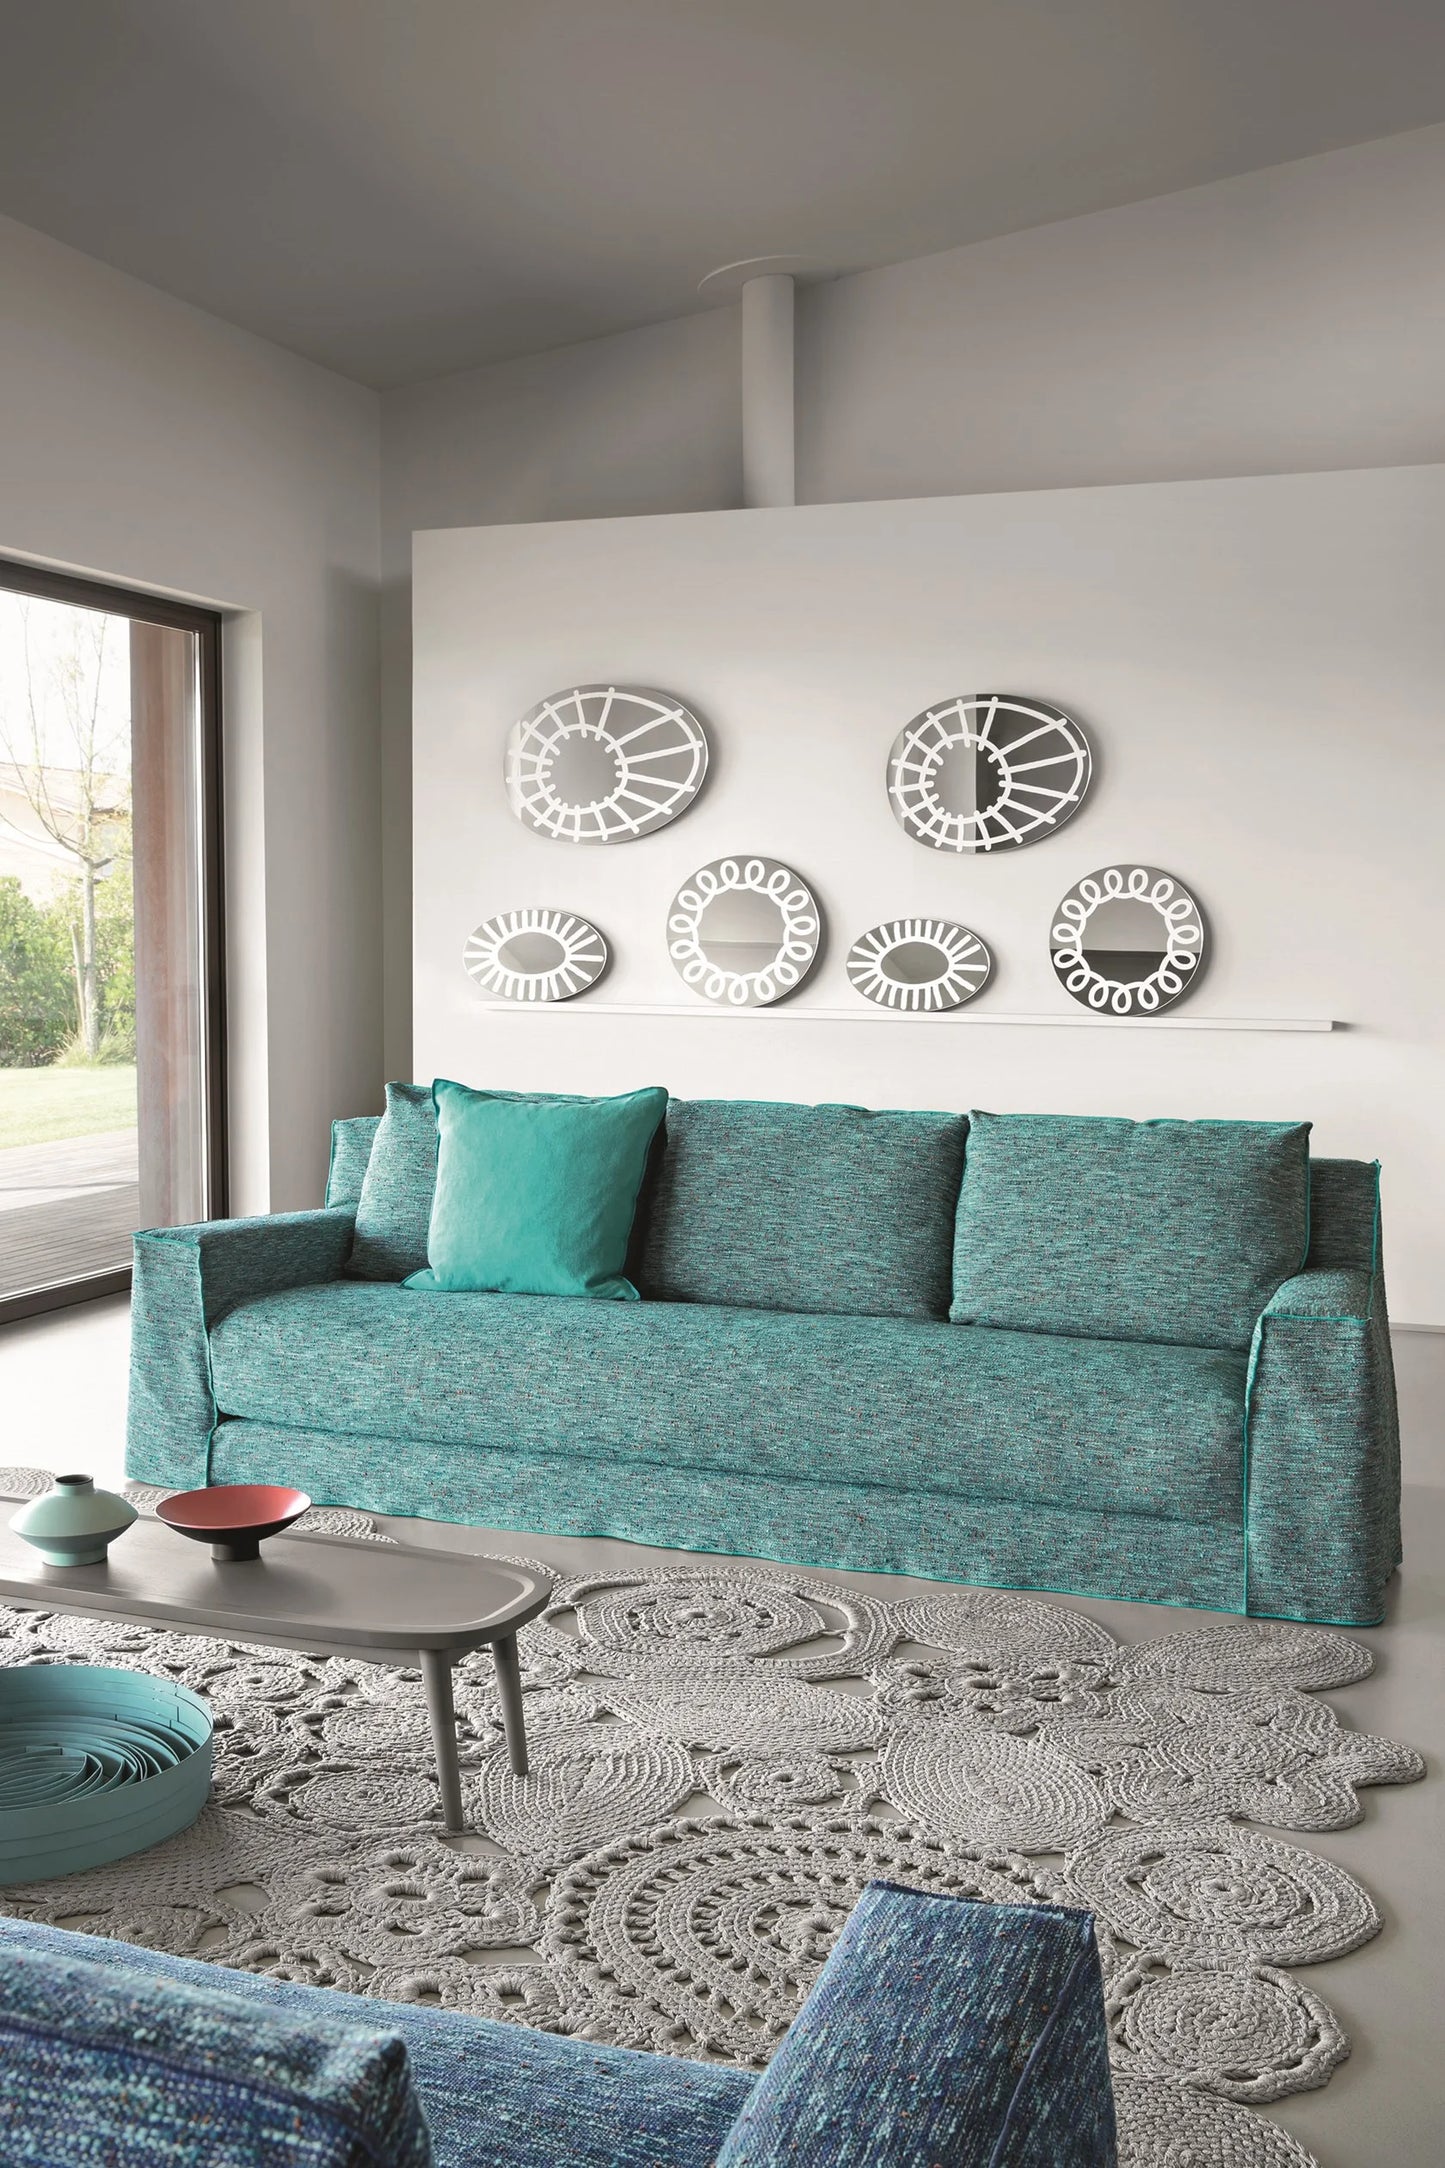 Gervasoni Loll 14 Sofa in White Linen Upholstery by Paola Navone - $9,250.00